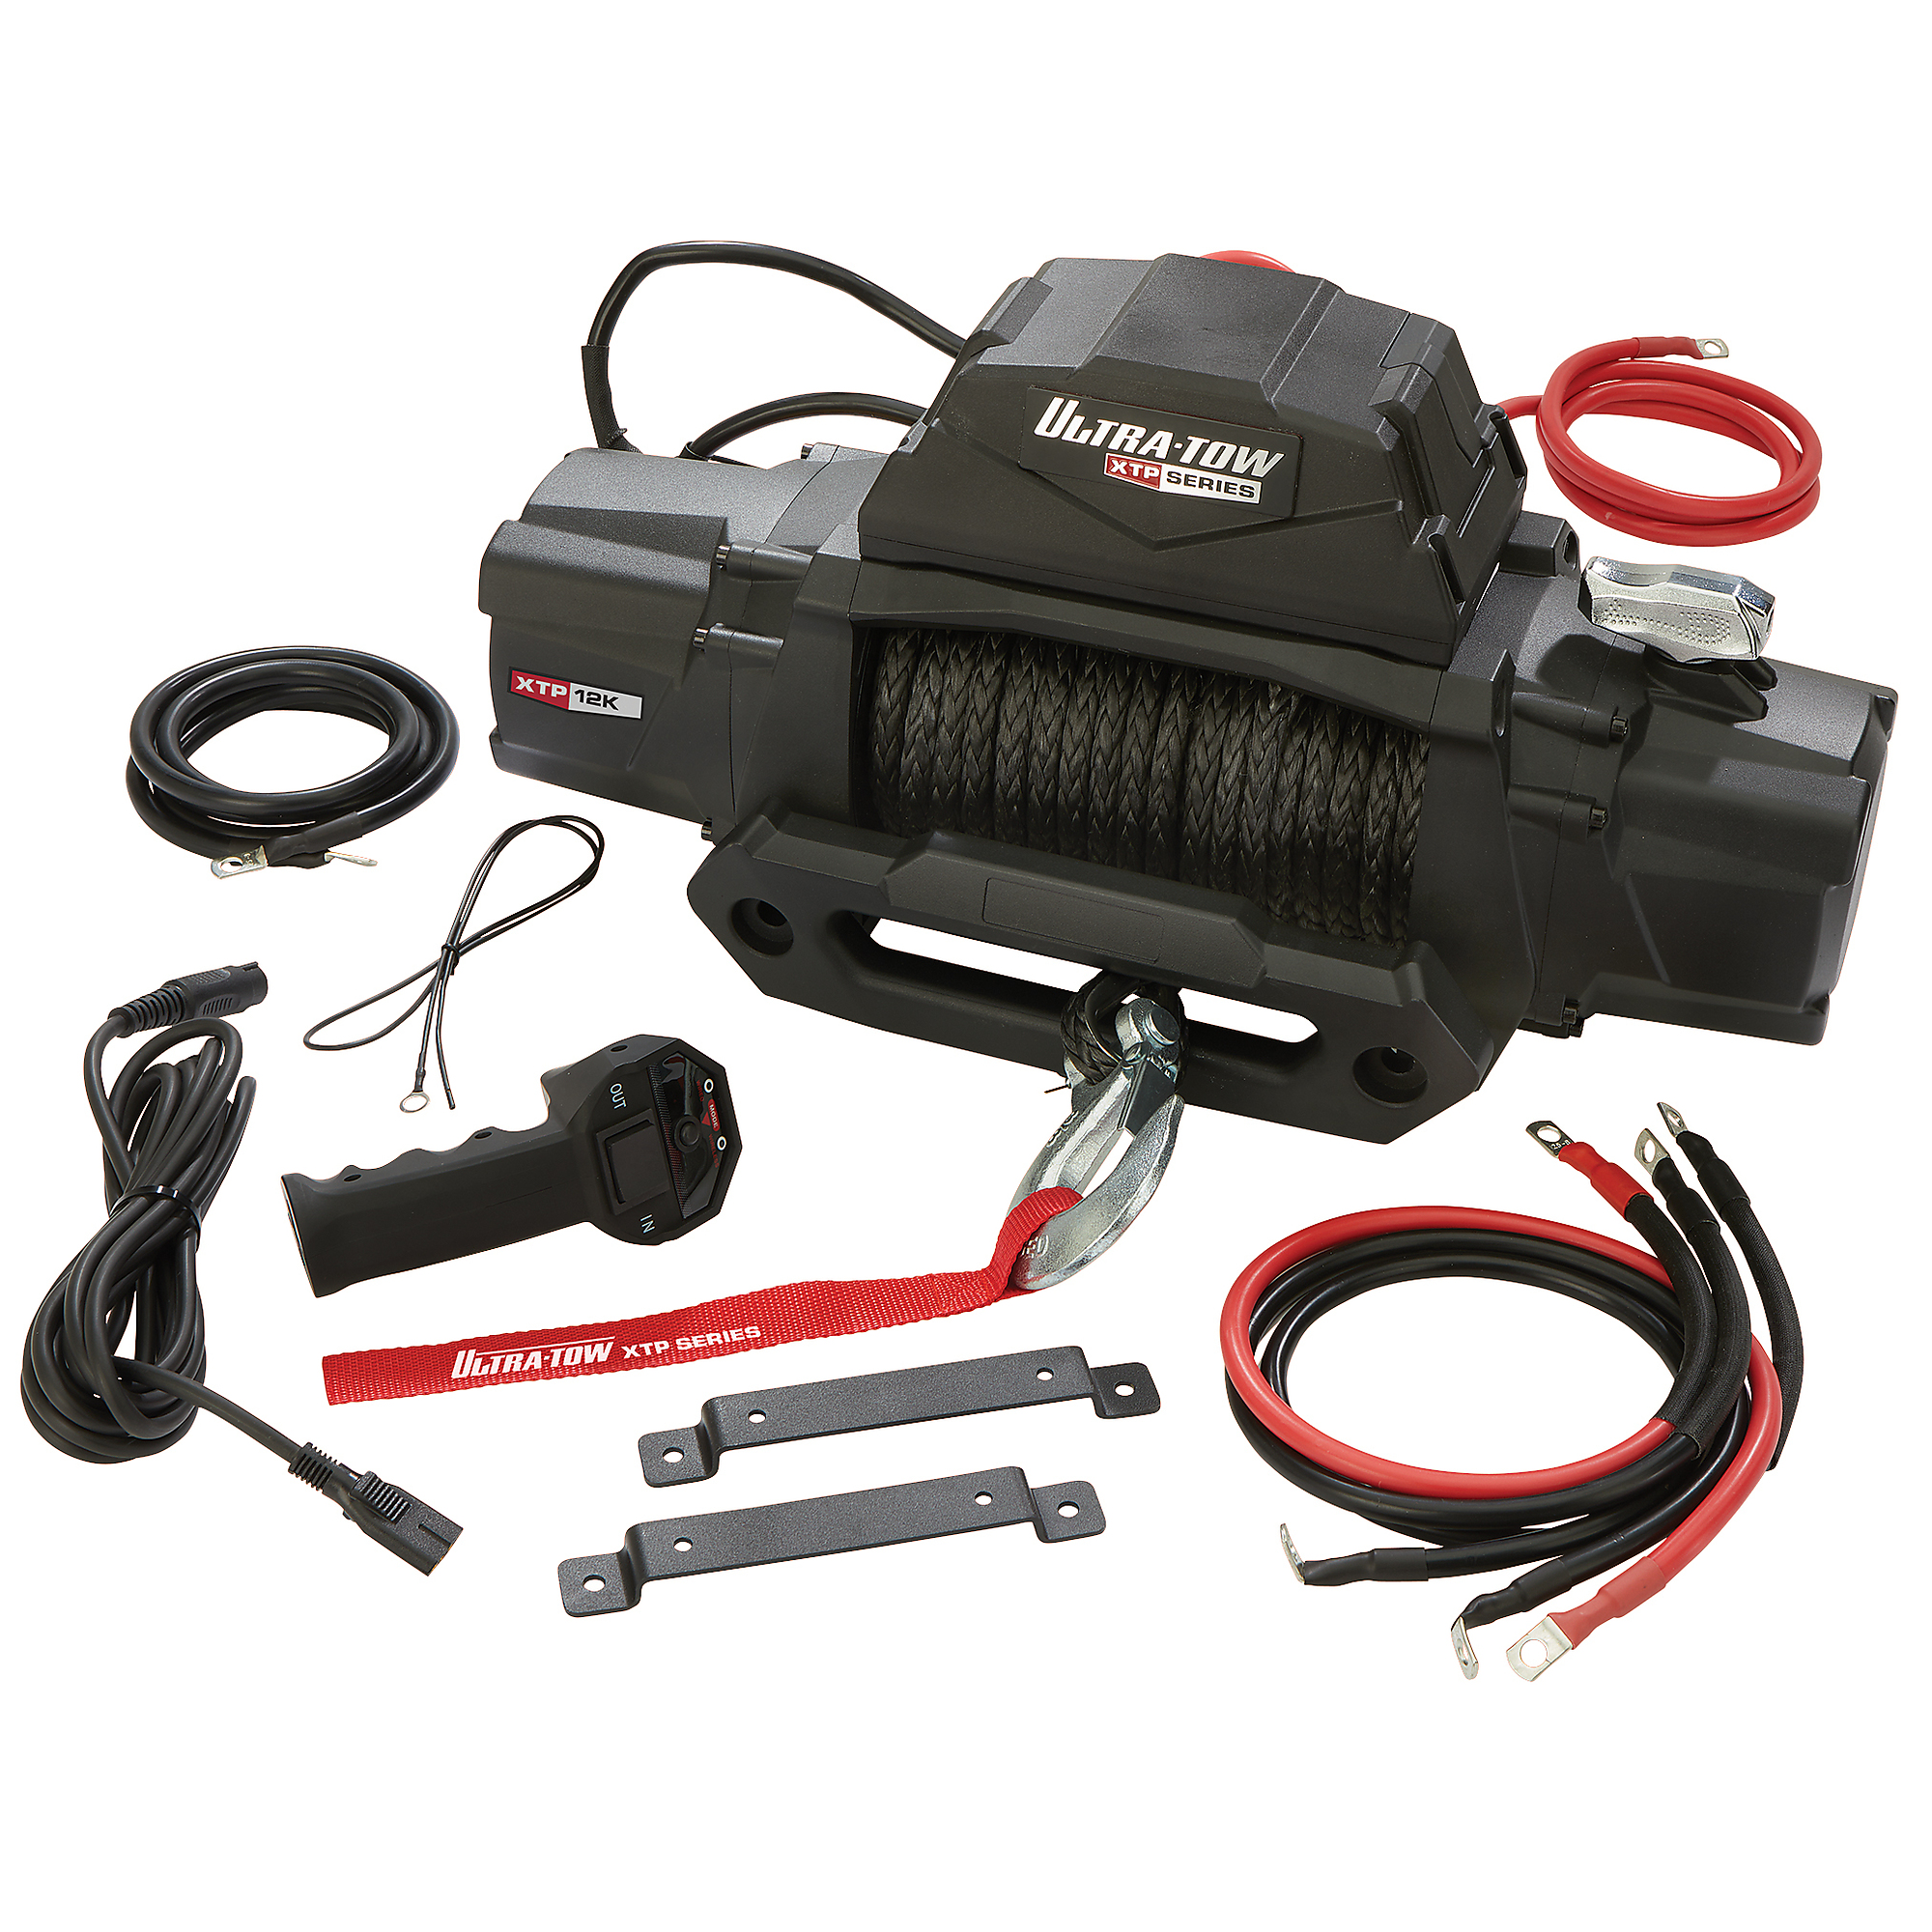 Ultra-Tow XTP 12 Volt Off-Road Vehicle Winch with Synthetic Rope, 12,000-Lb.  Capacity, 390 Max. Amps, Model# LD-TT12000B